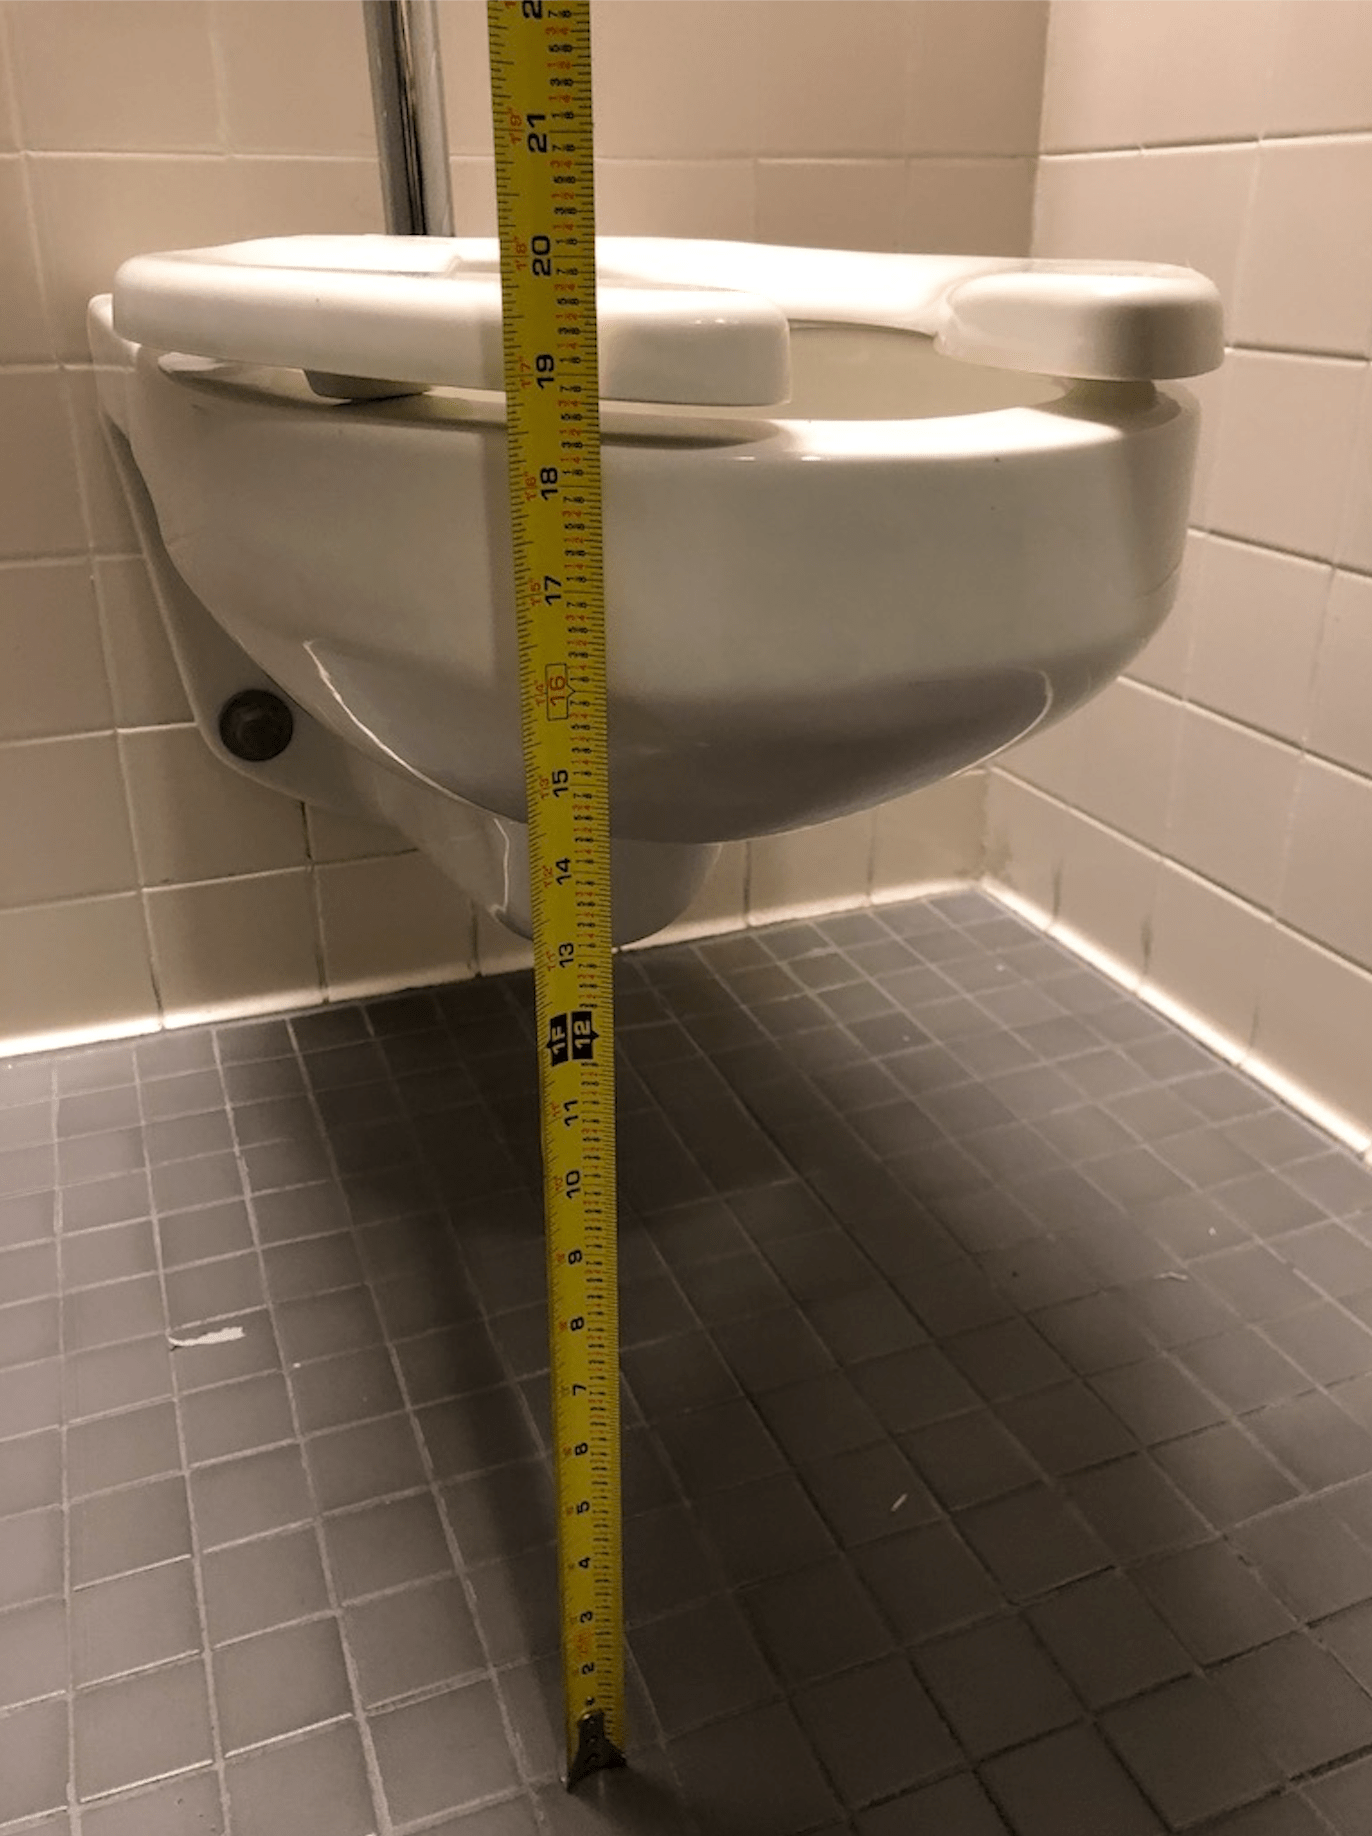 Everyone Should Be Able to Use the Public Restroom